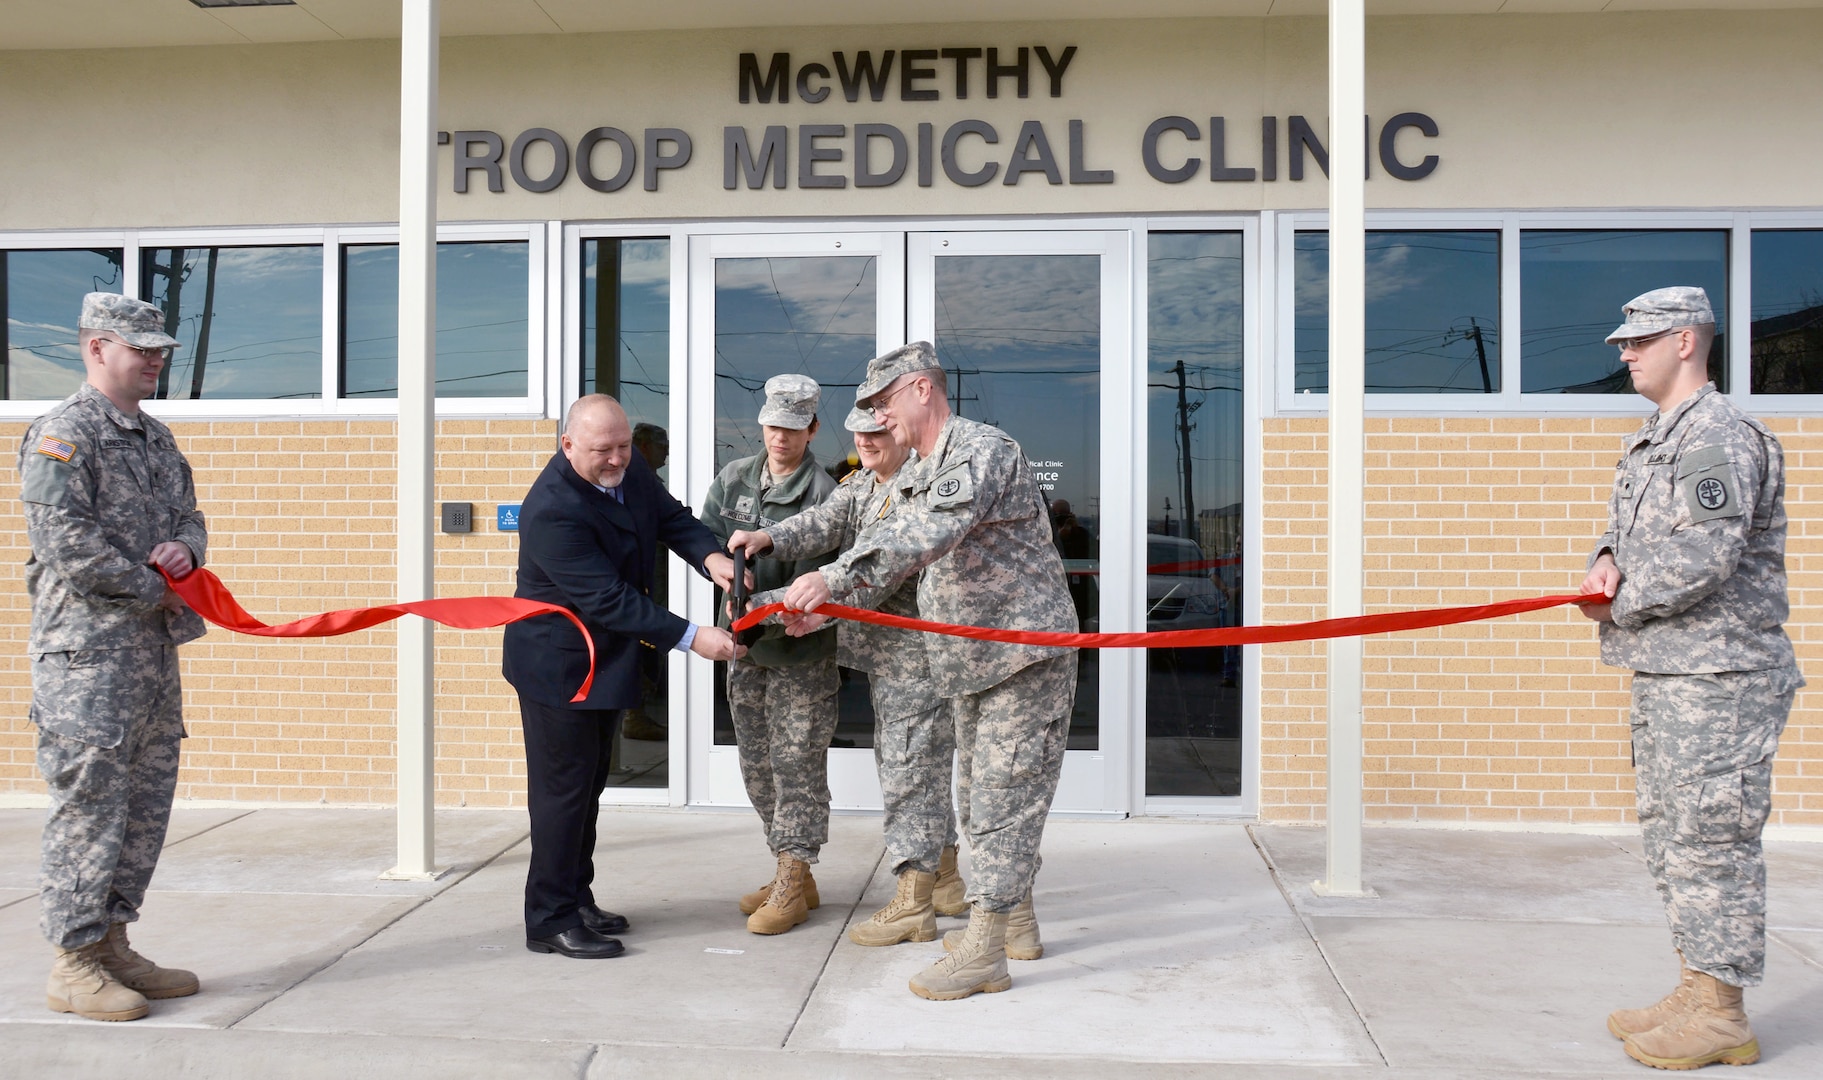 (From left) Curtis Aberle, McWethy Troop Medical Clinic chief; Brig. Gen. Barbara Holcomb, commander of Southern Regional Medical Command; Col. Carol Rymer, Optometry Service chief; and Col. Evan Renz, Brooke Army Medical Center commander, cut the ribbon officially reopening McWethy Troop Medical Clinic Jan. 6 after a 16-month, $13 million renovation.
Photo by Robert Shields